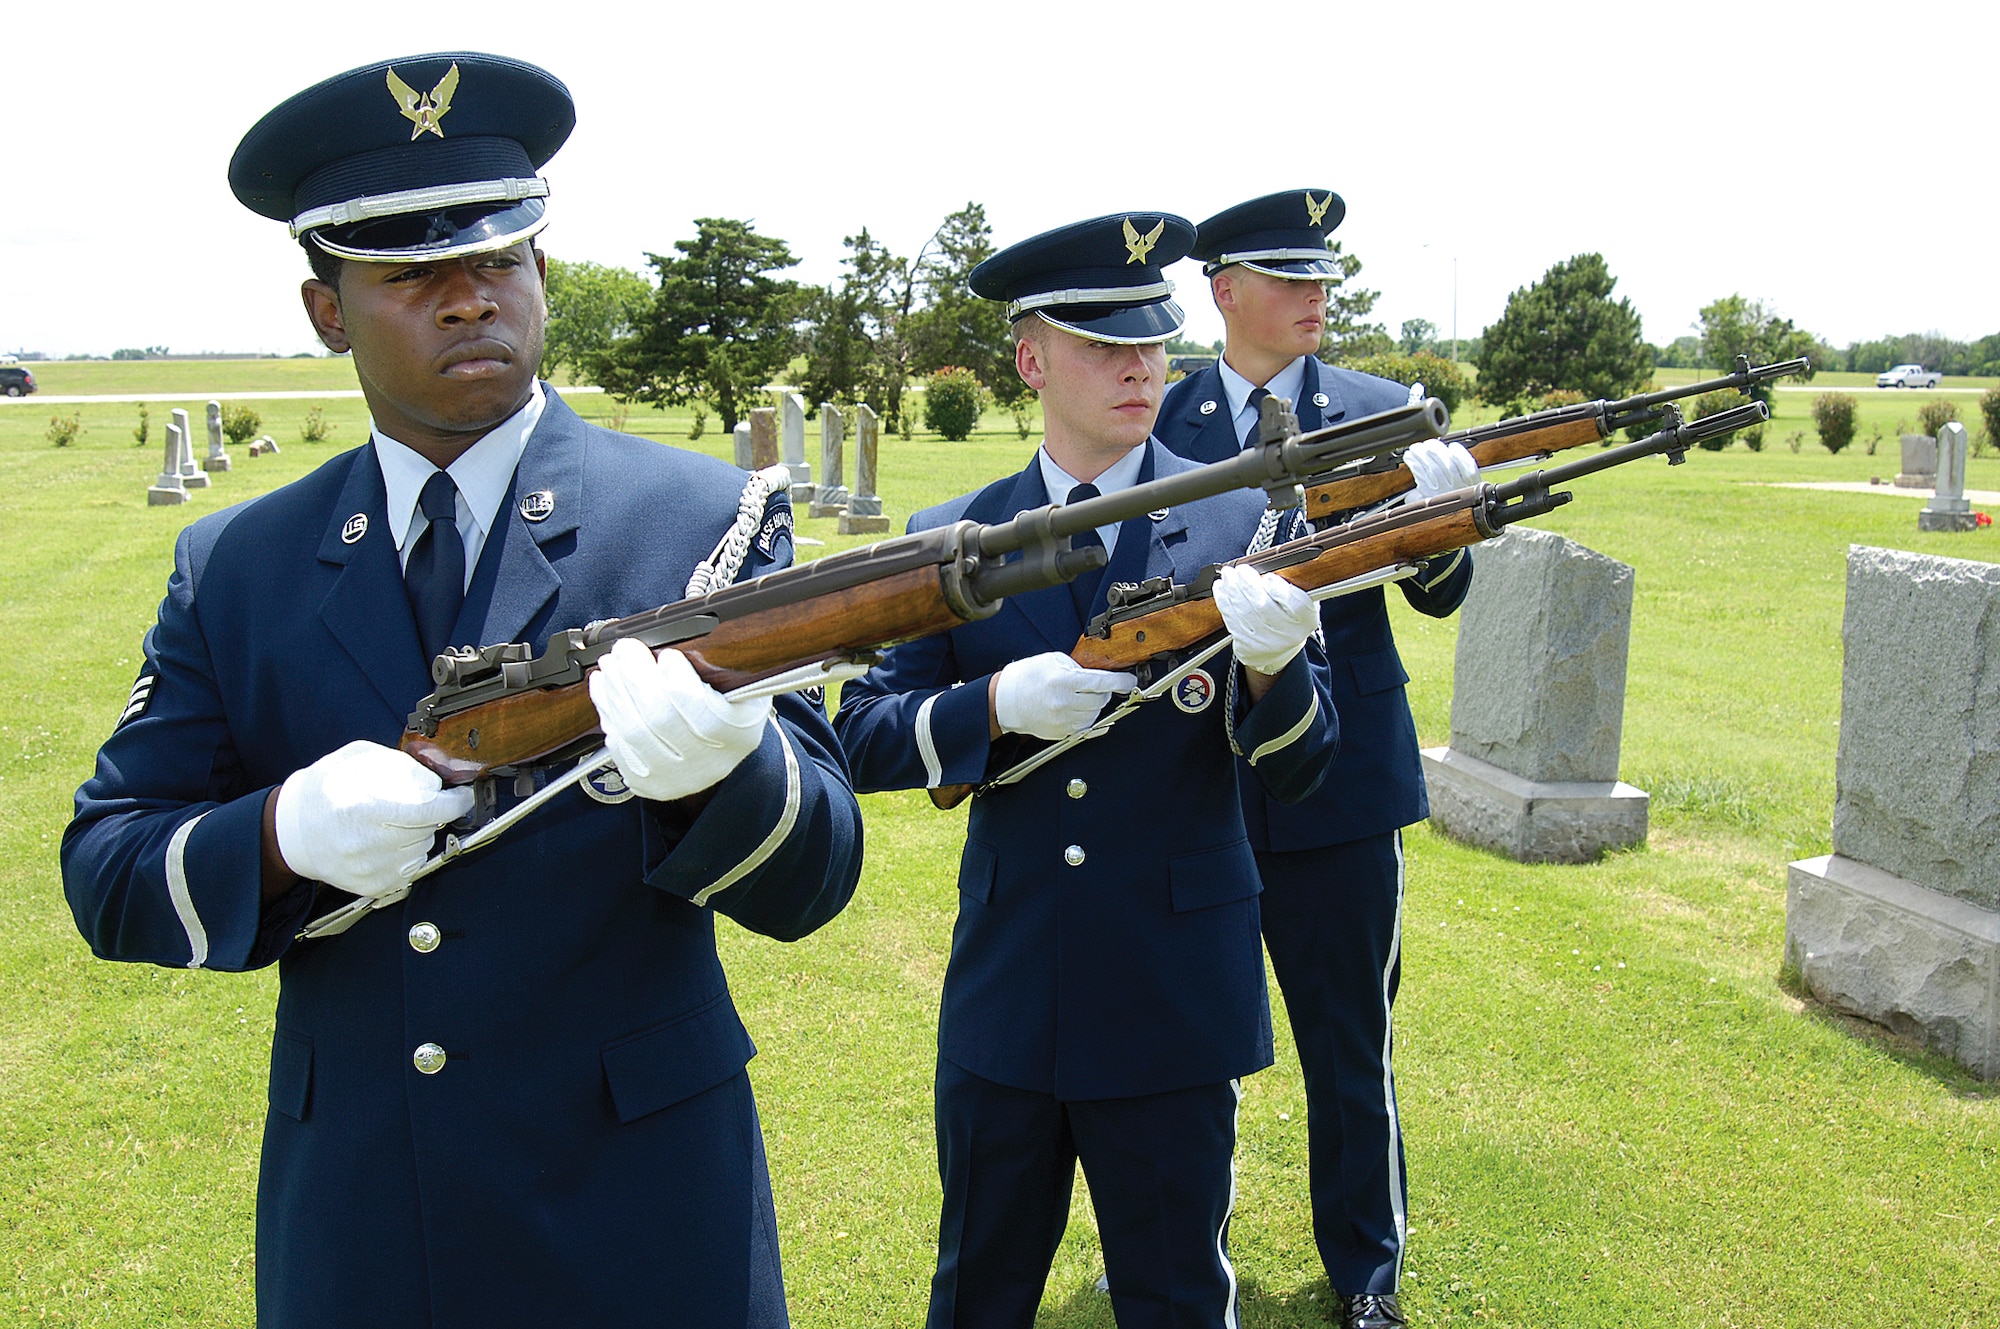 Training is on-going for the Airmen who volunteer and join the Tinker Honor Guard.  Funerals make up the large part of their responsibilities but on base they are best known for their presentation of the colors and their vital roles in changes of command, retirements, awards ceremonies and special events where they represent the Air Force and Tinker to the community.